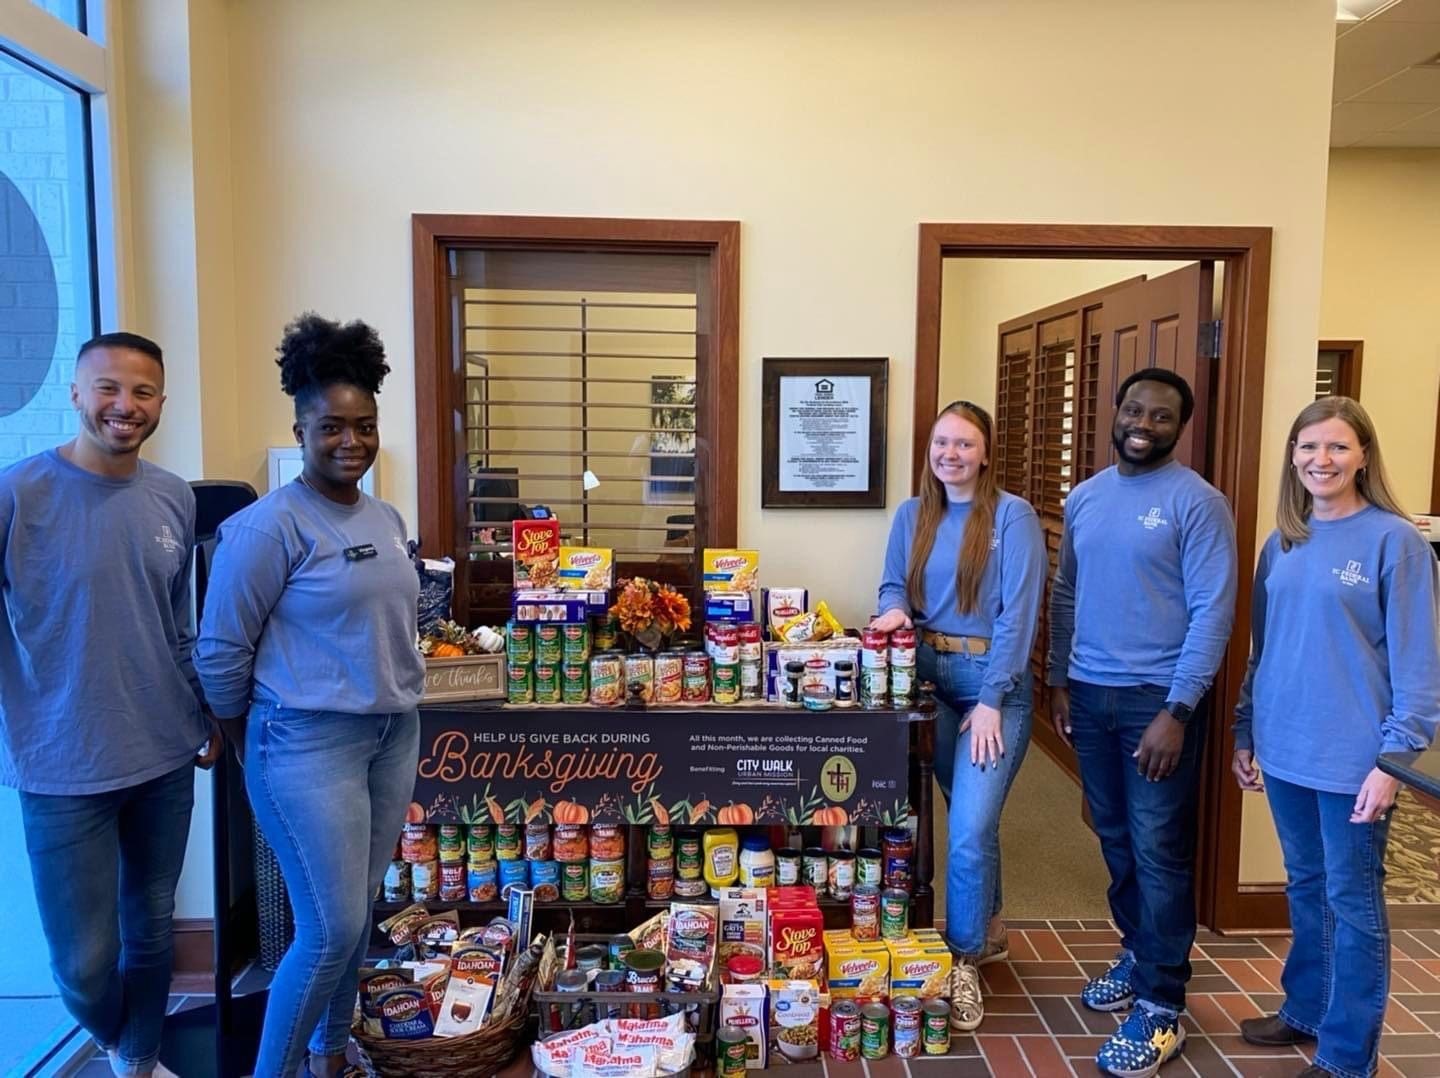 Tallahassee Branch Banksgiving Food Drive Campaign